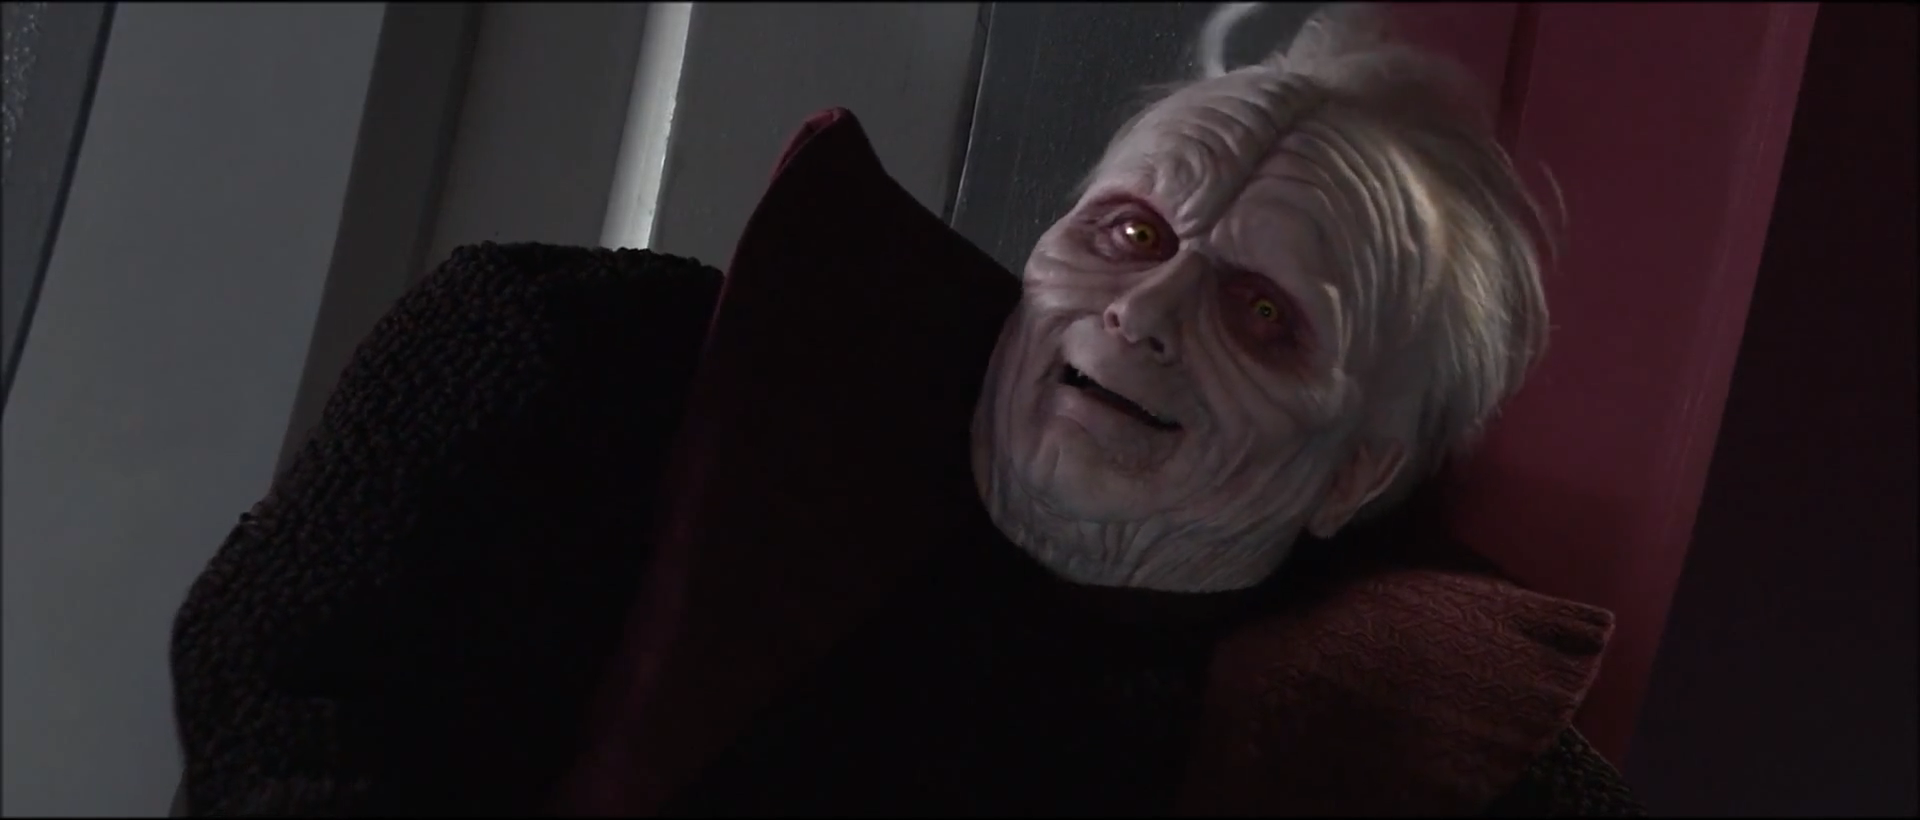 Palpatine smiles as Anakin betrays Mace Windu allowing him to kill the Jedi in Revenge of the Sith